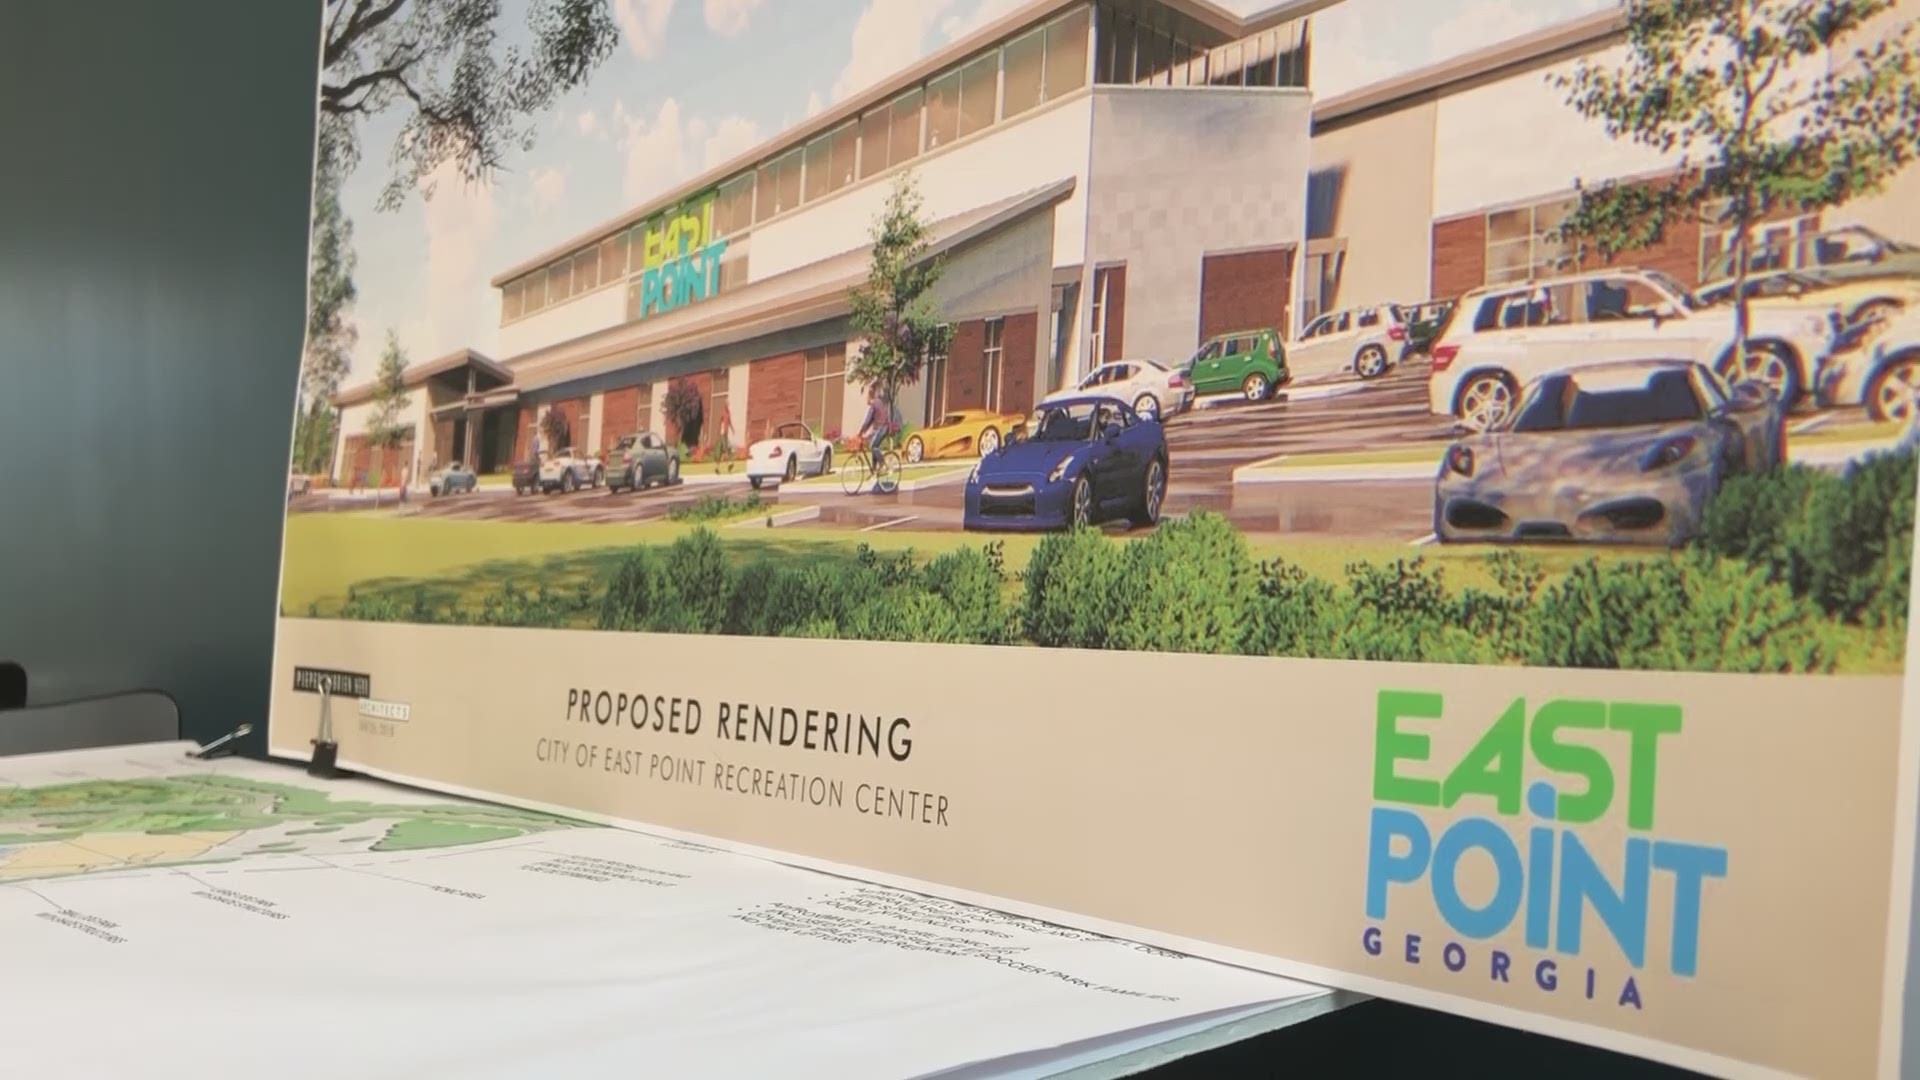 City of East Point hosts community meetings for new proposed recreation and aquatic center